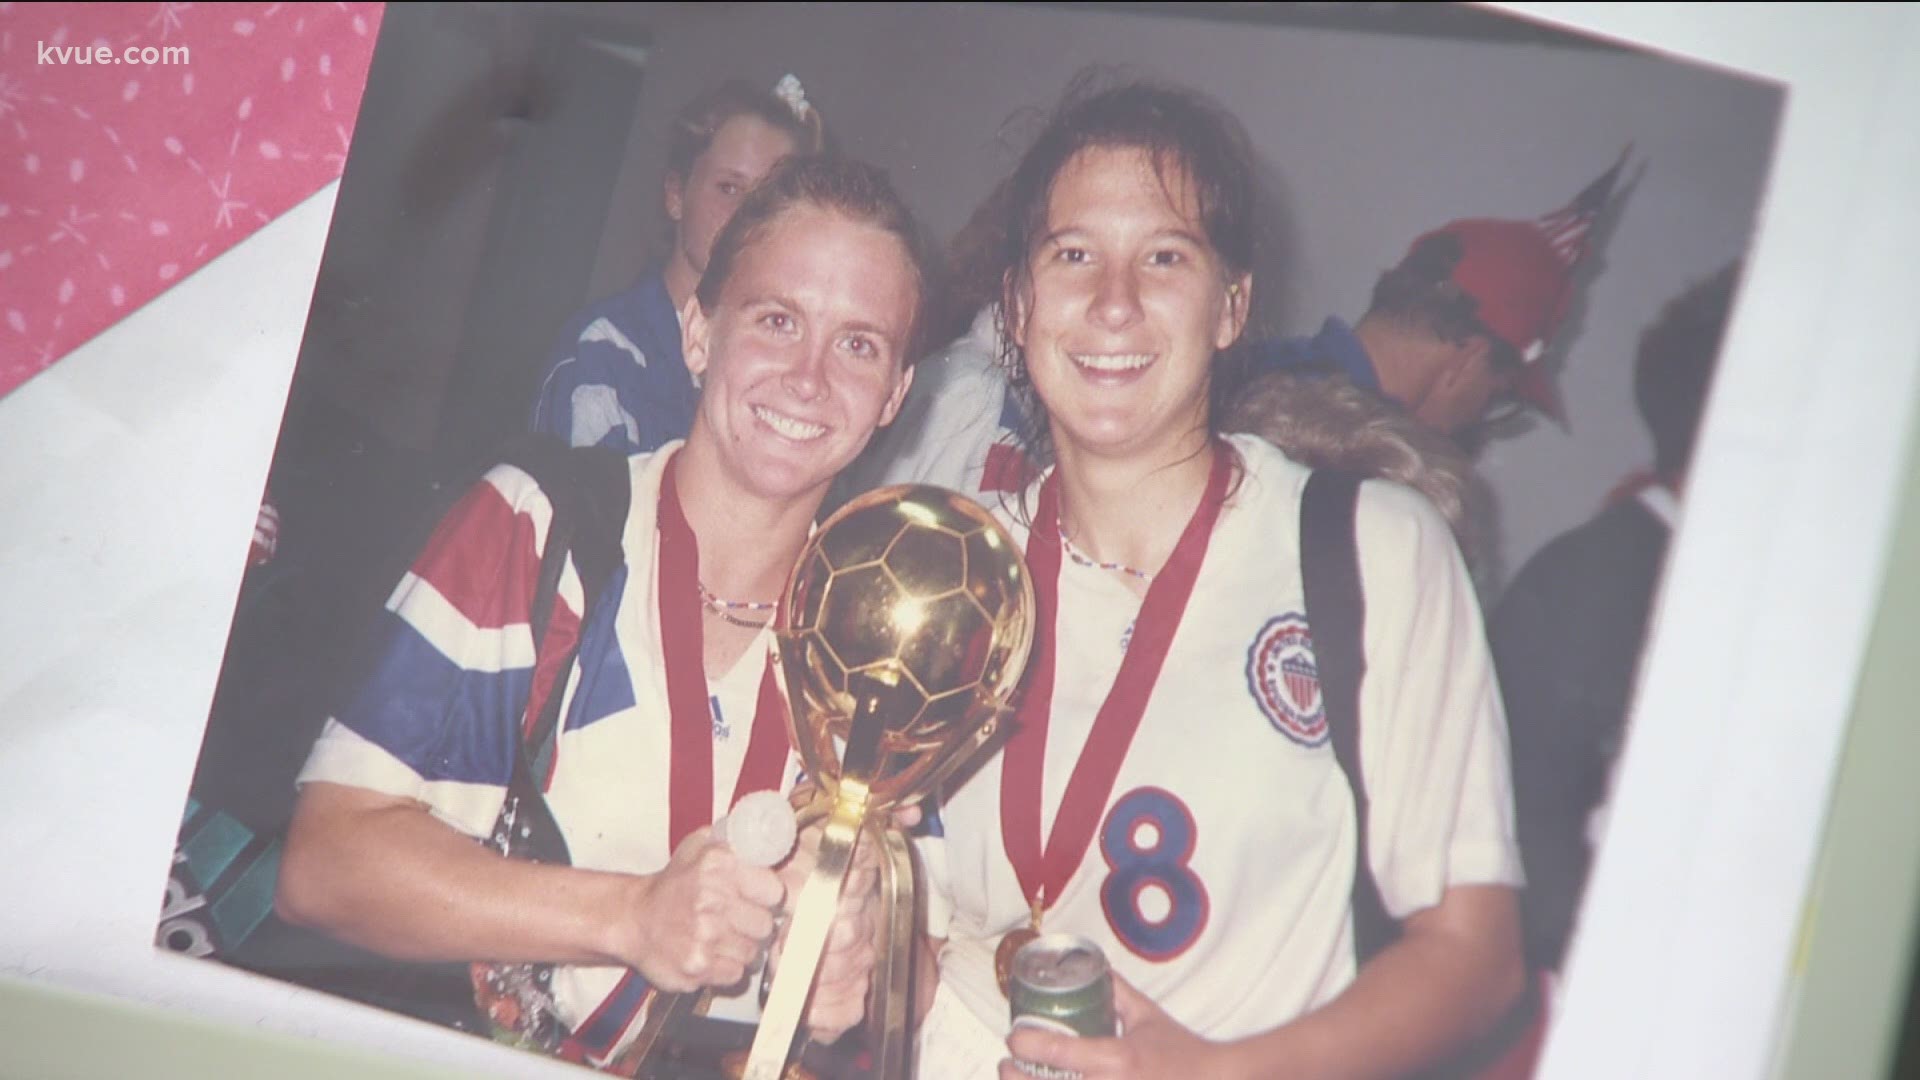 The path to public consciousness was long and straining for the USWNT. But with trailblazers like Southwestern head coach Linda Hamilton, it was inevitable.